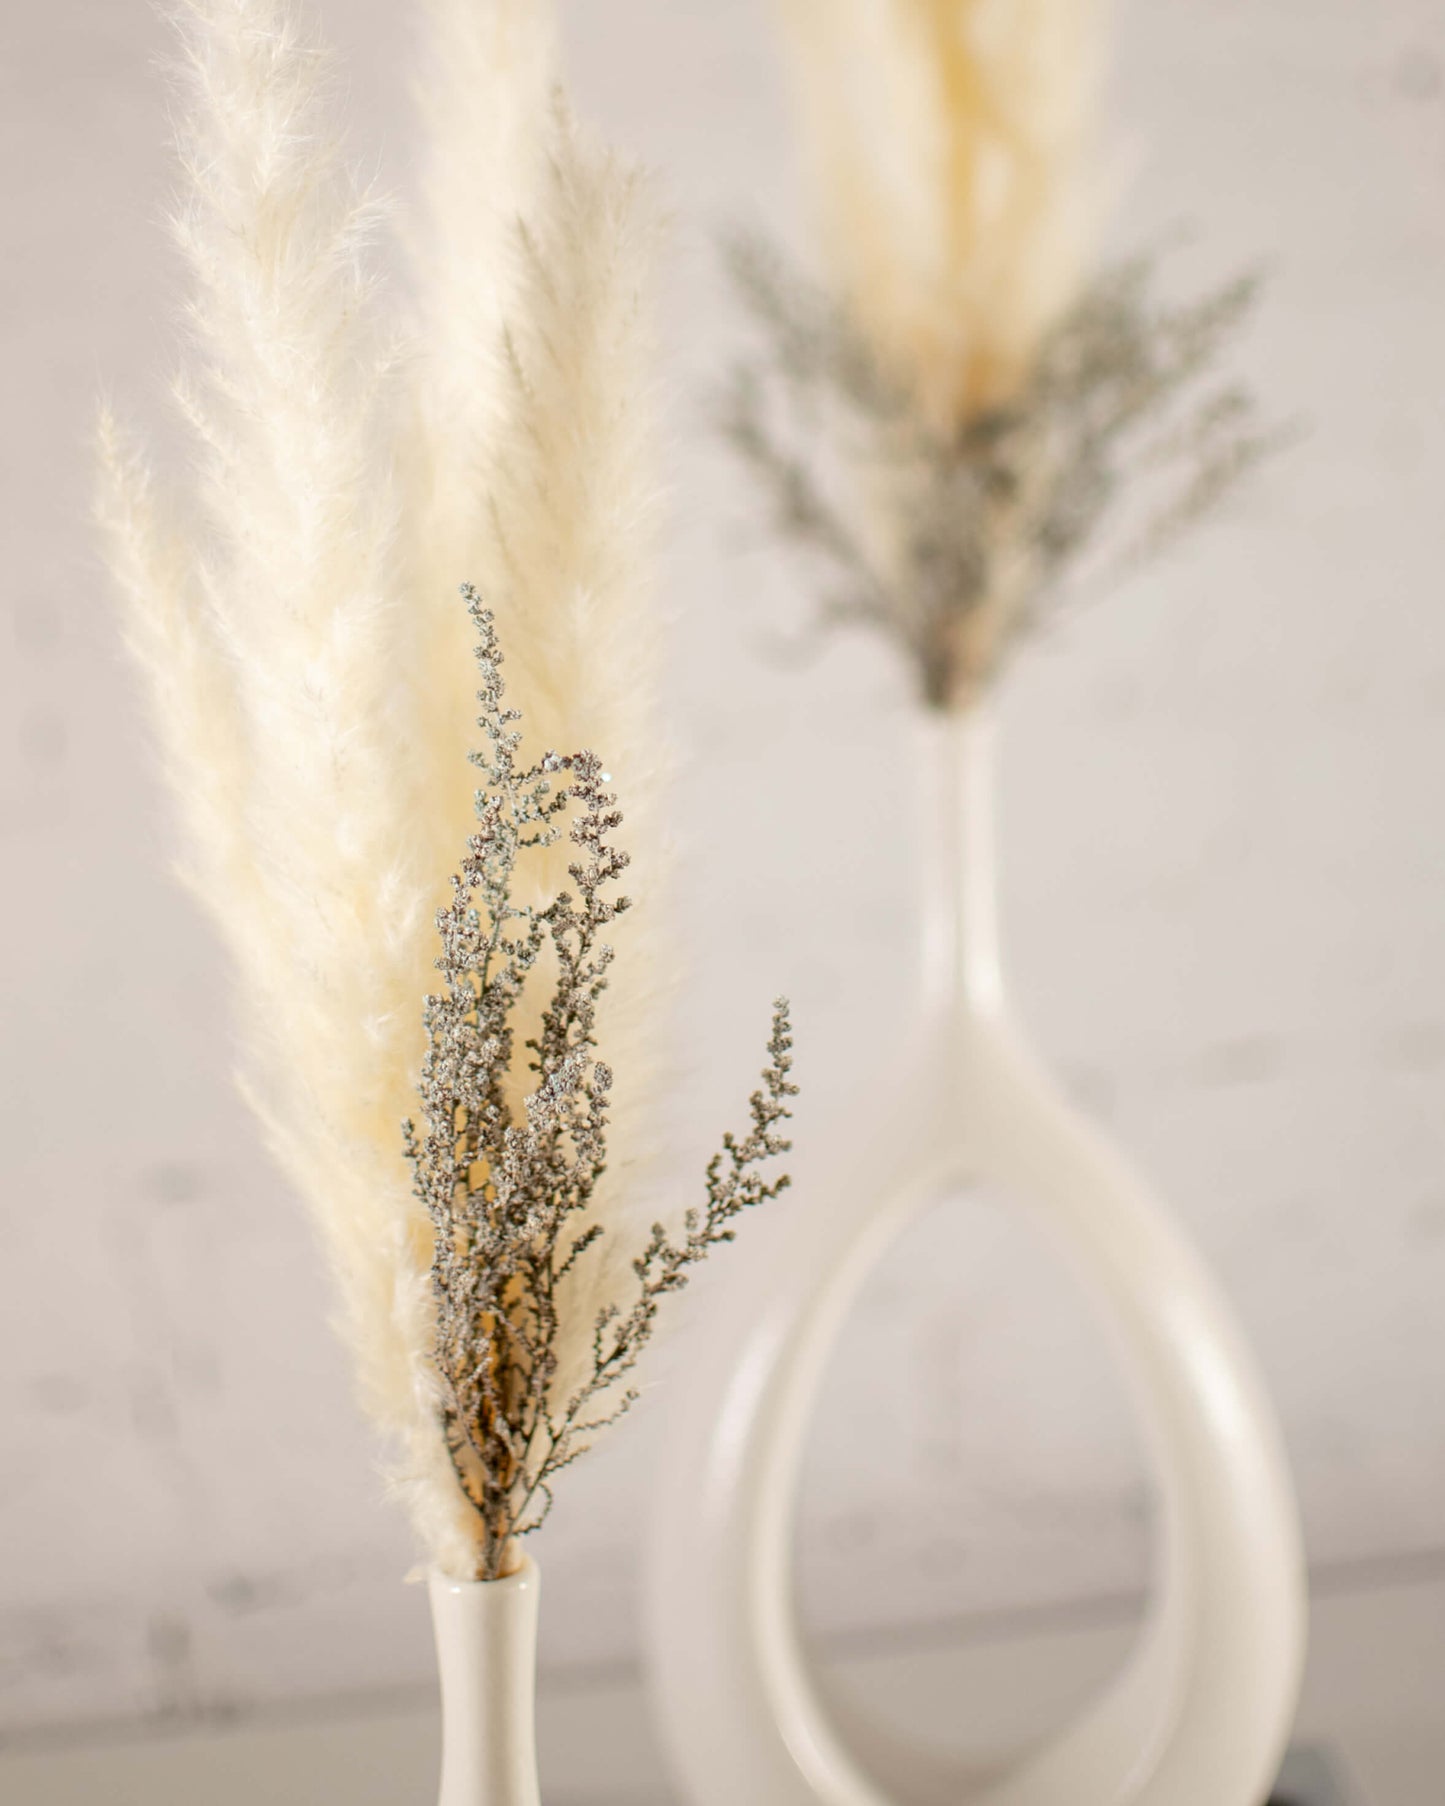 BOHEMIAN WHITE DOUBLE VASE WITH DRIED BUNNY TAILS